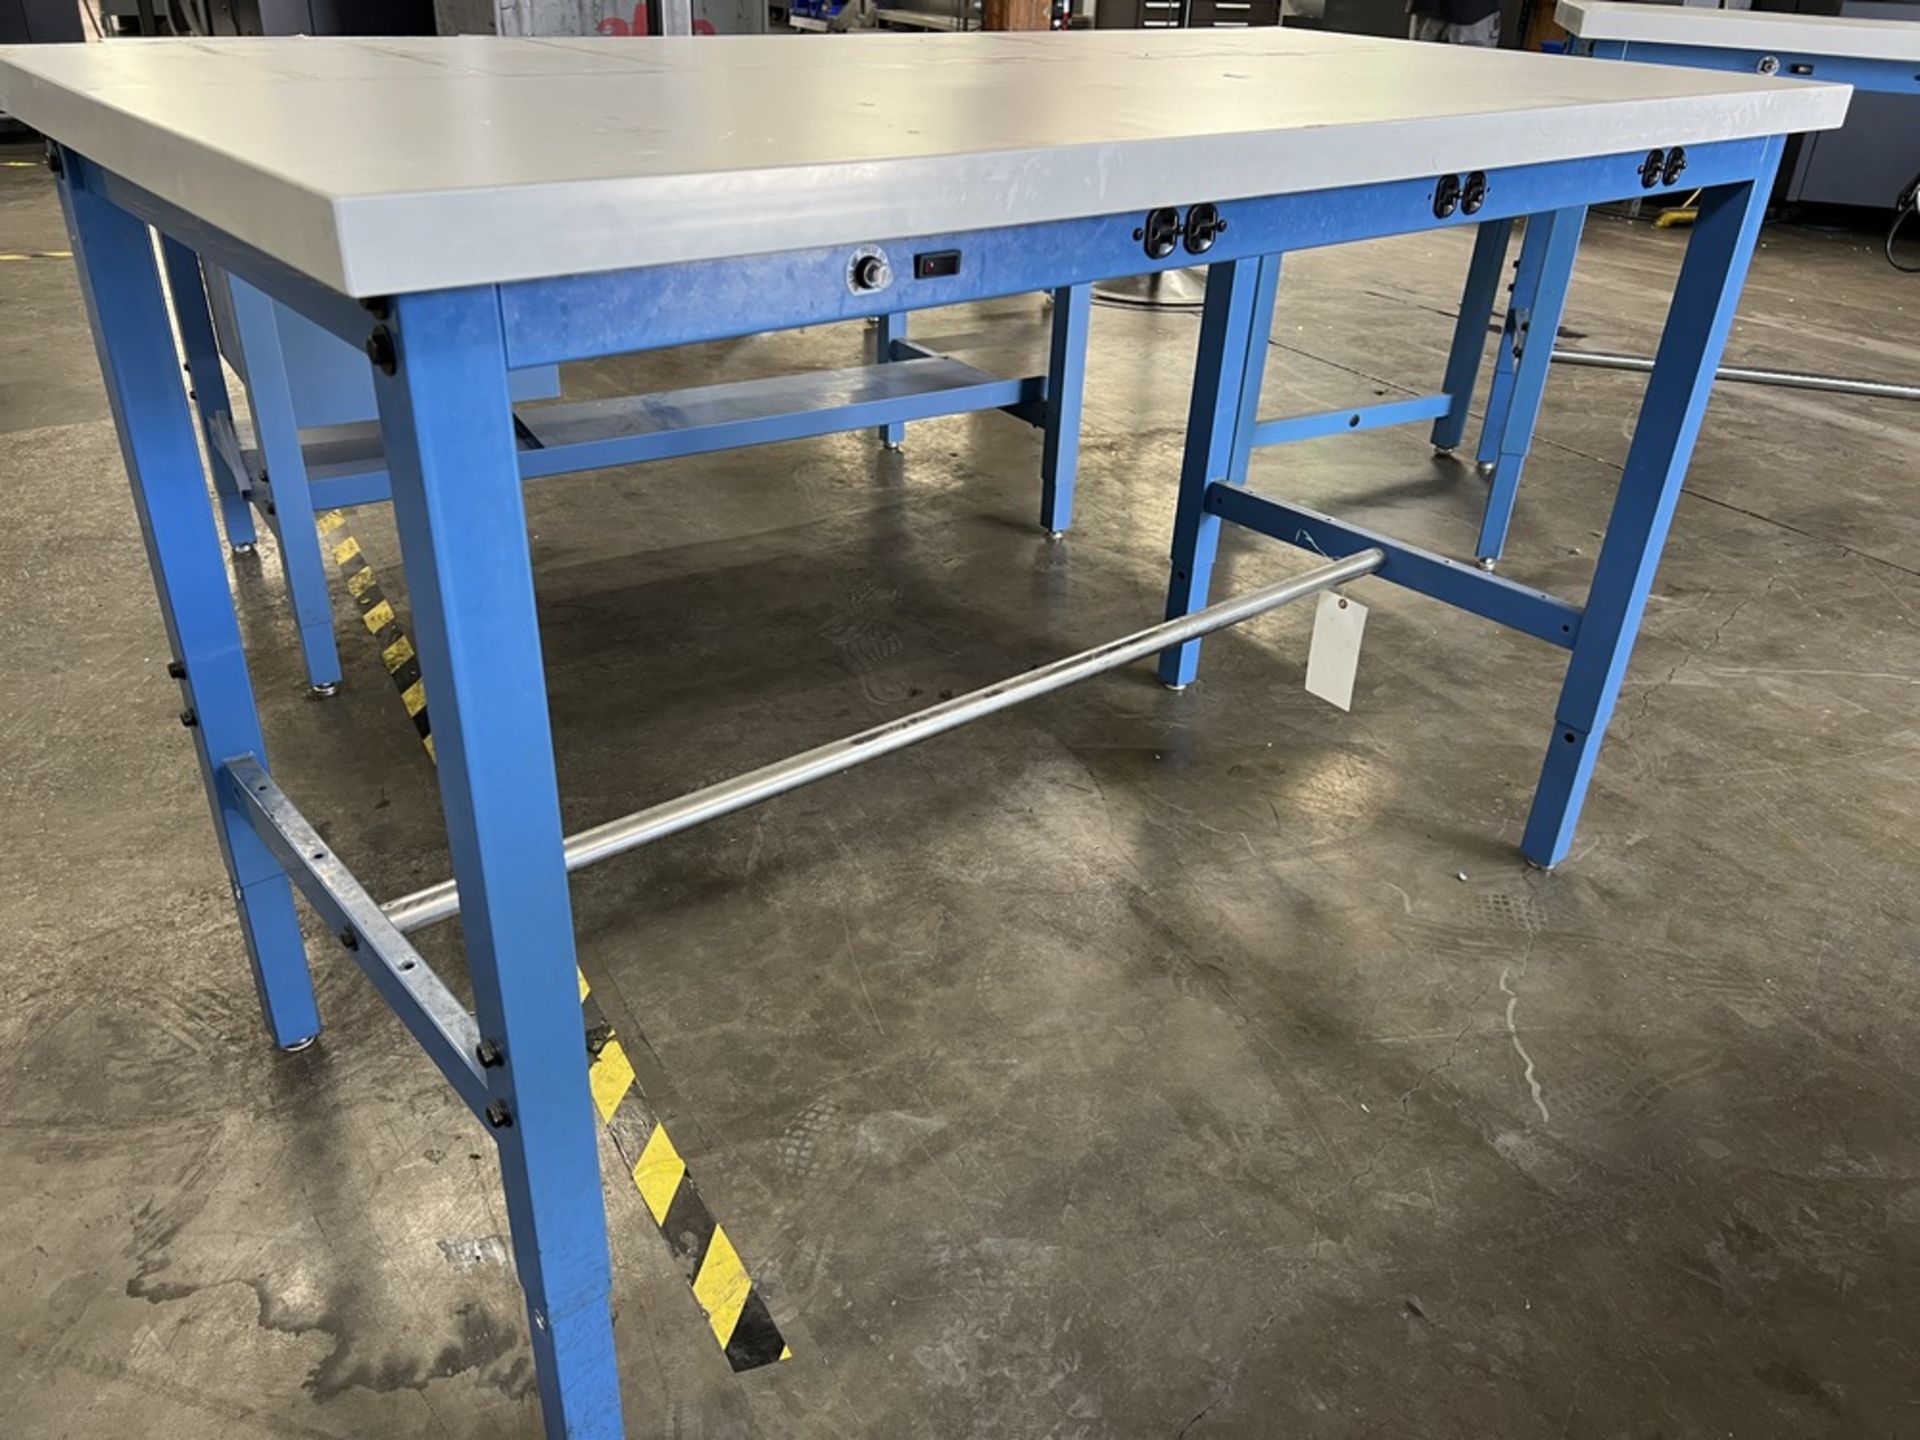 Global Industrial Adjustable Shop Table 60" x 30" x 38" With Built In Power Strip - Image 3 of 4